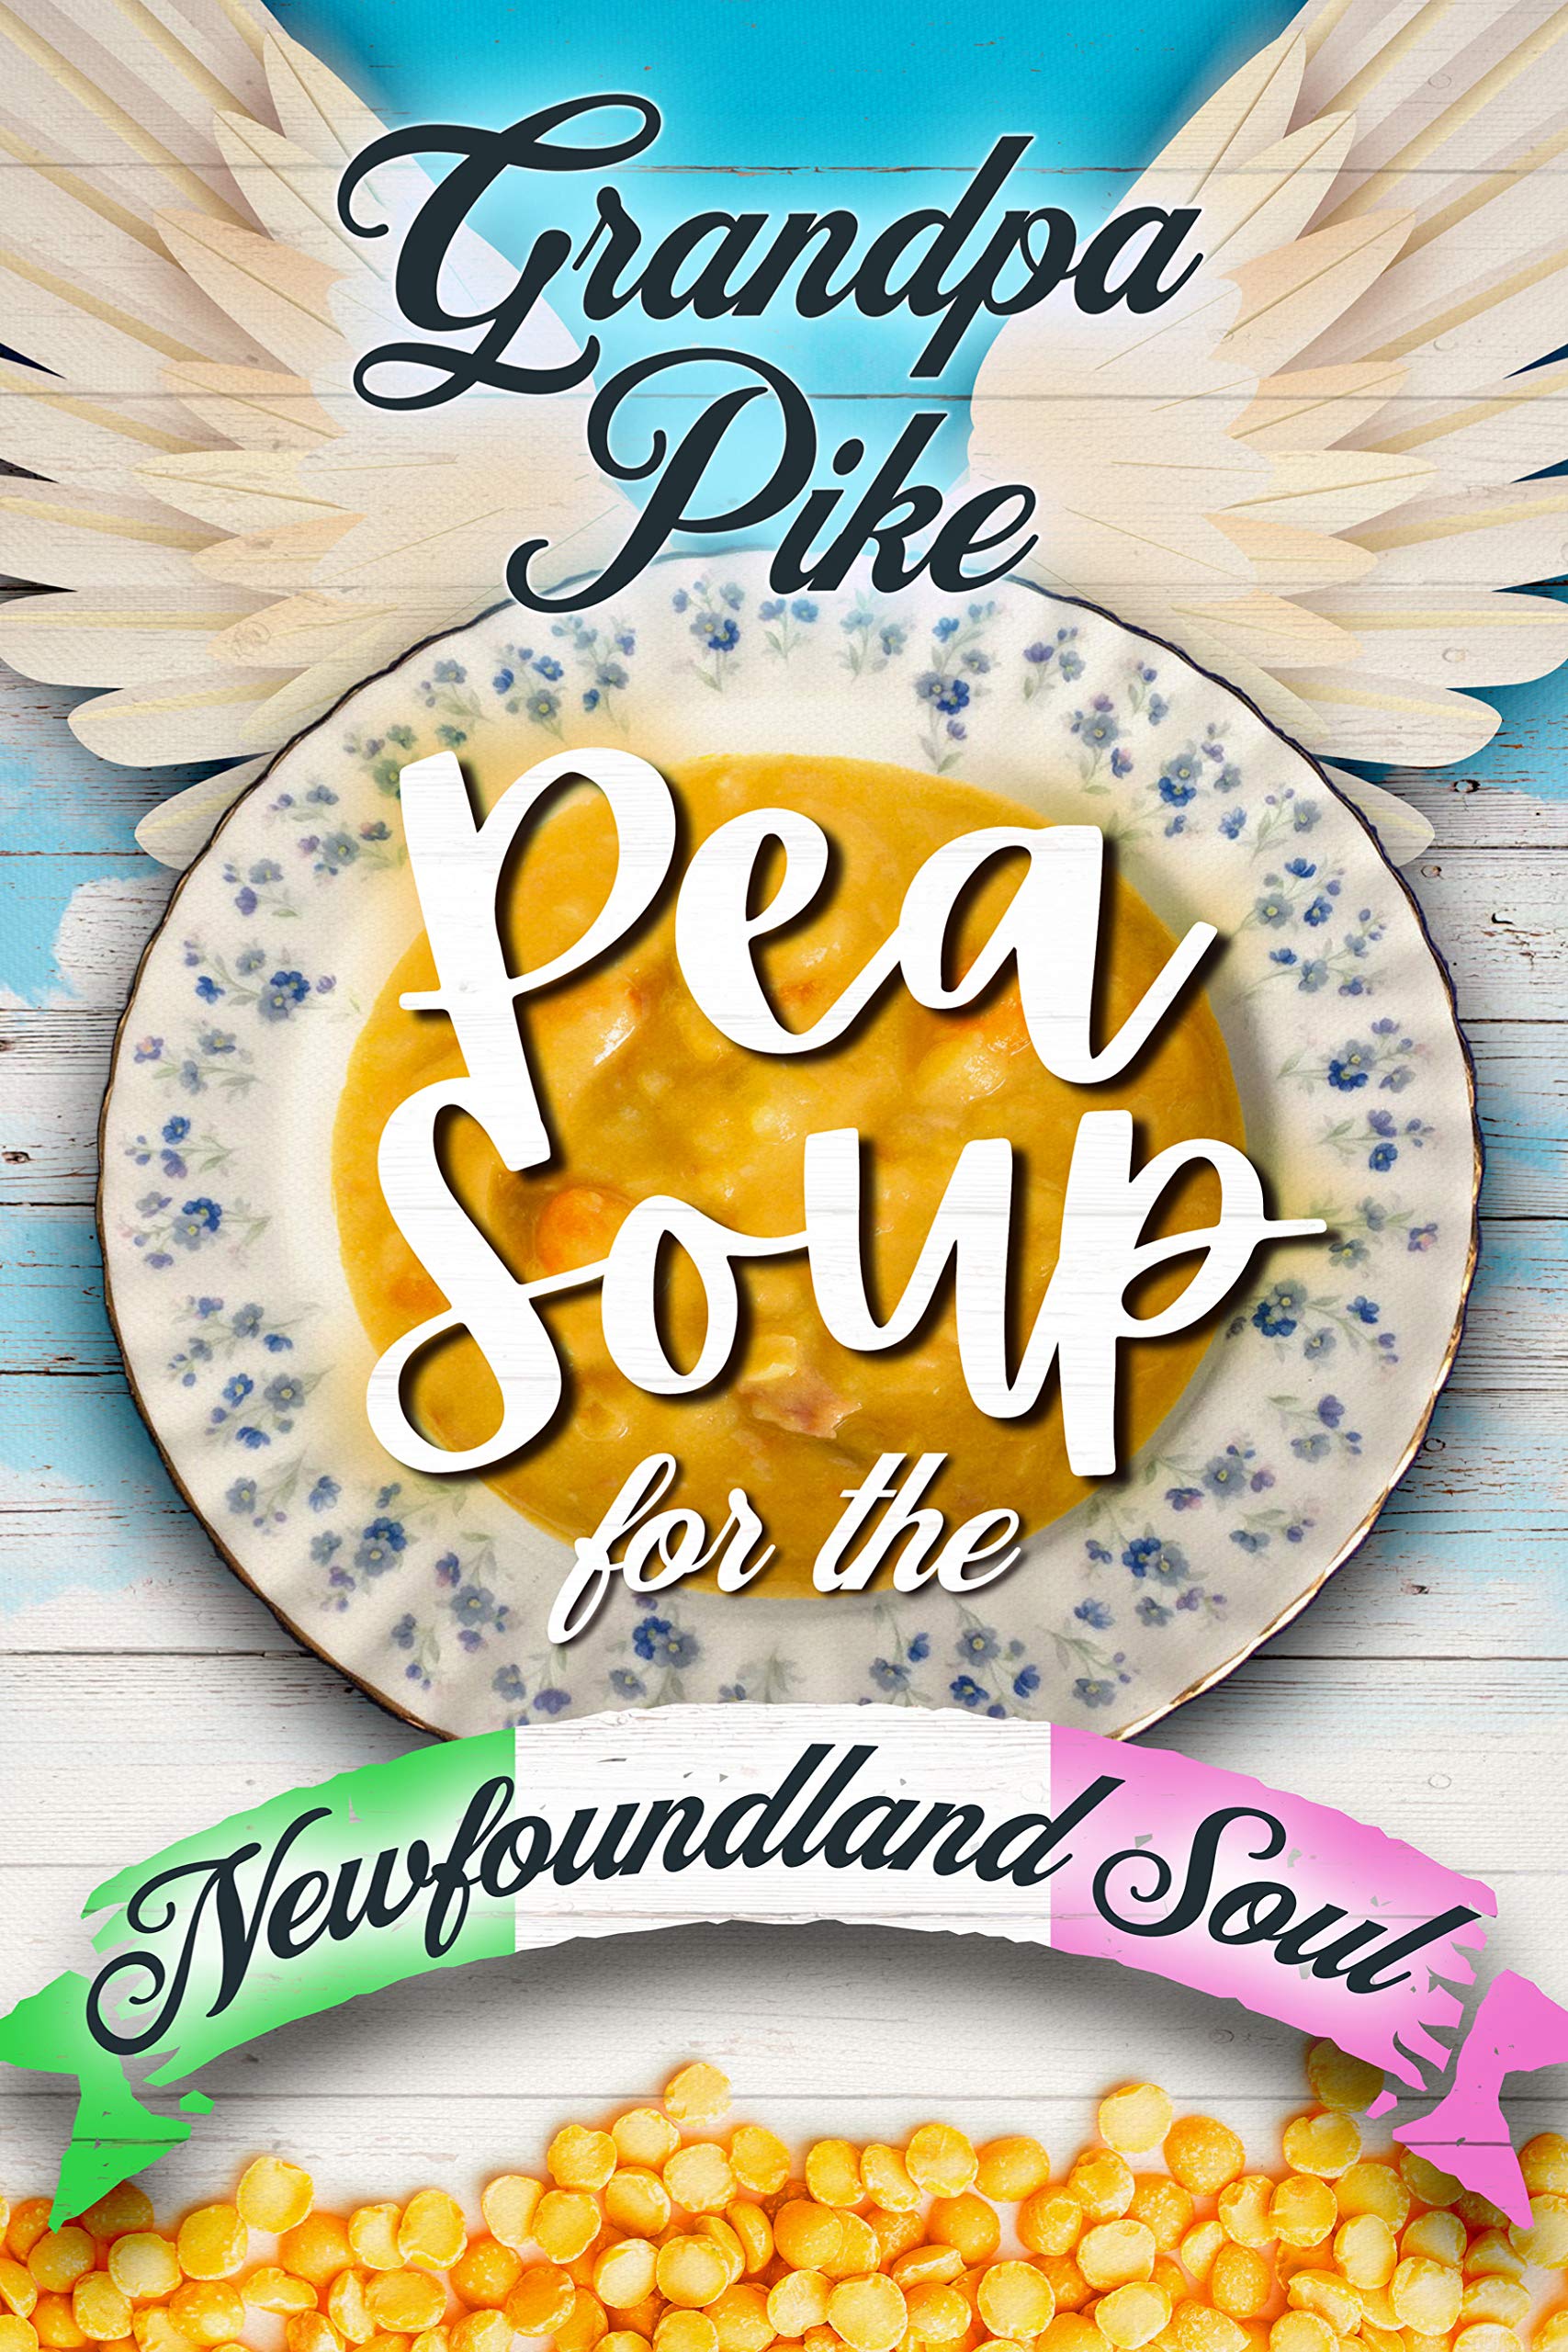 Pea Soup for the Newfoundland Soul